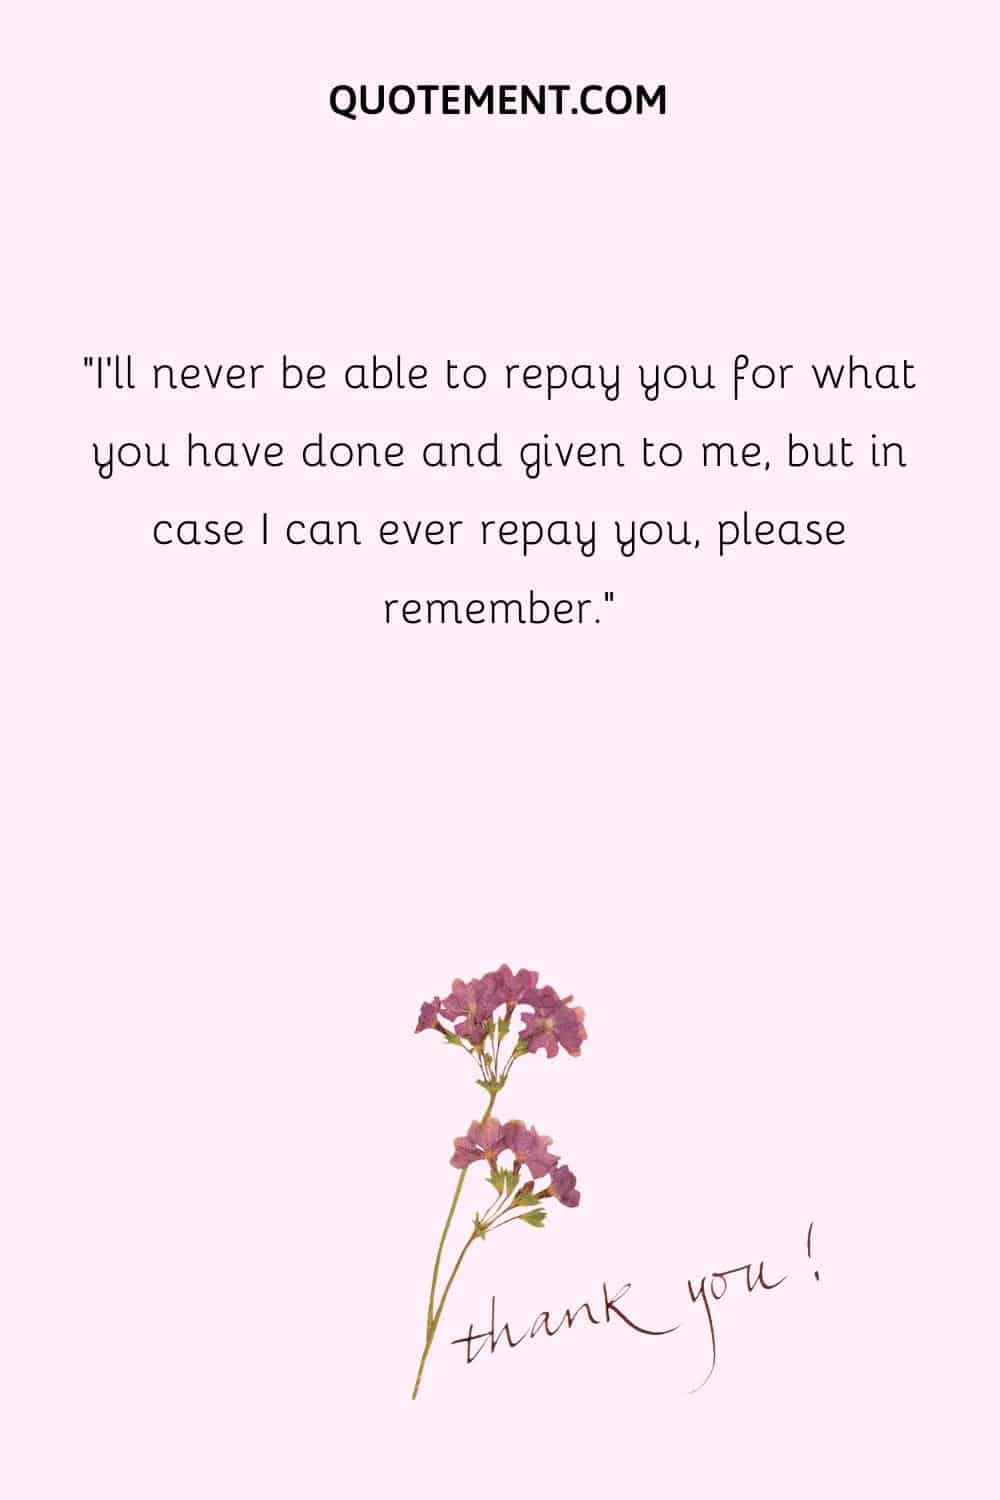 I'll never be able to repay you for what you have done and given to me, but in case I can ever repay you, please remember.